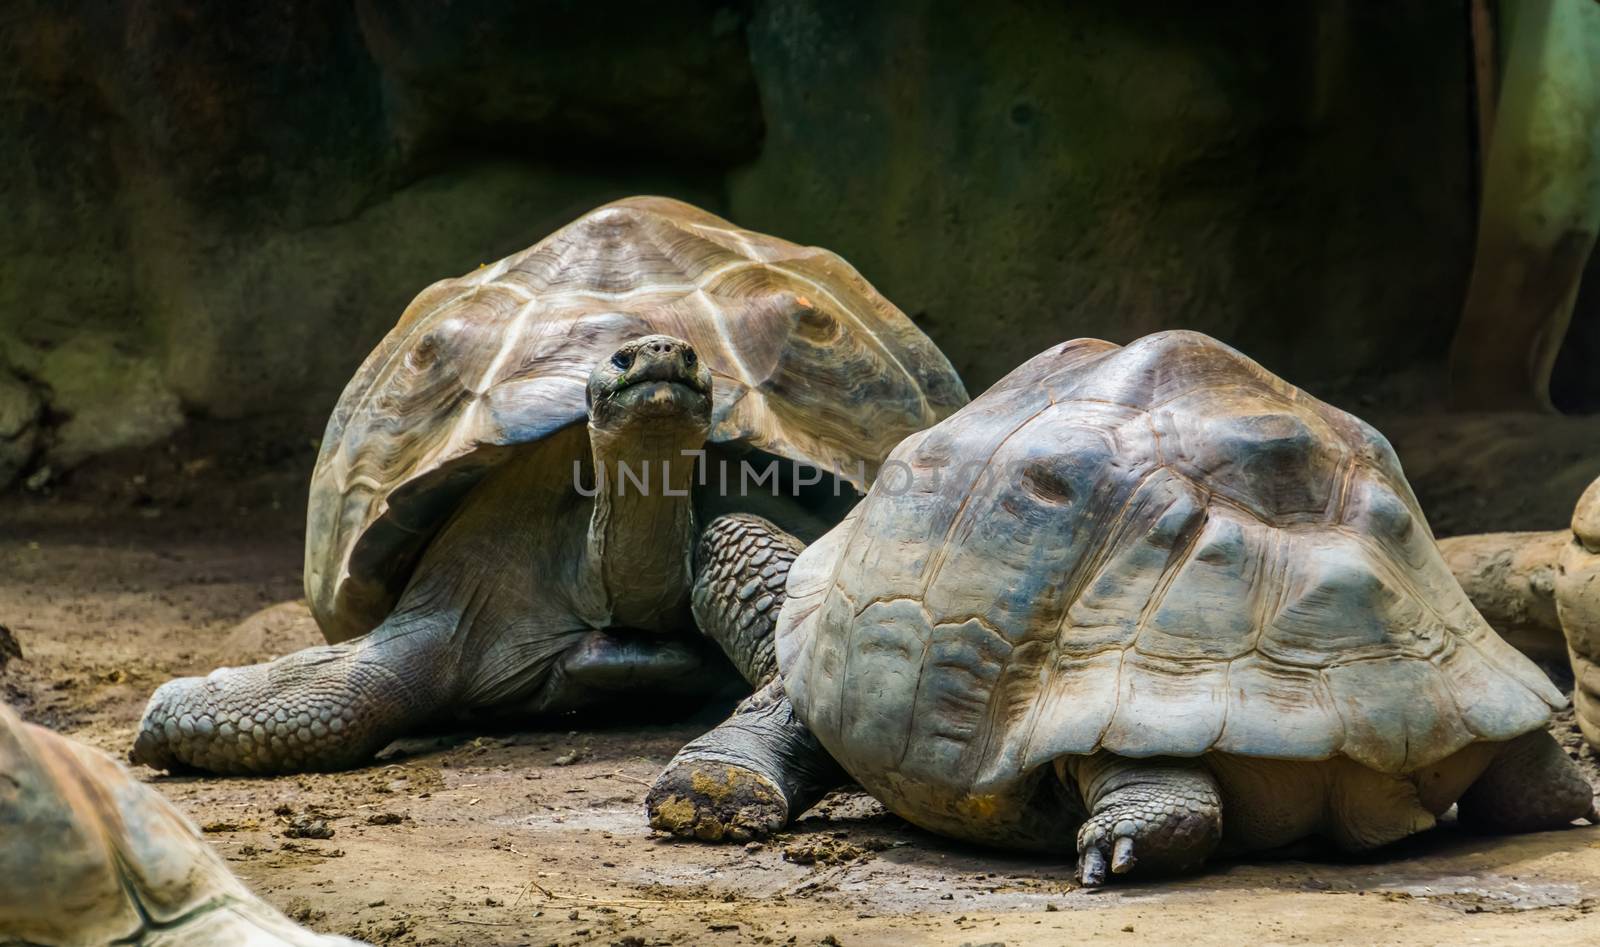 couple of galapagos tortoises close together, Giant and vulnerable land turtle specie from the Galapagos islands by charlottebleijenberg